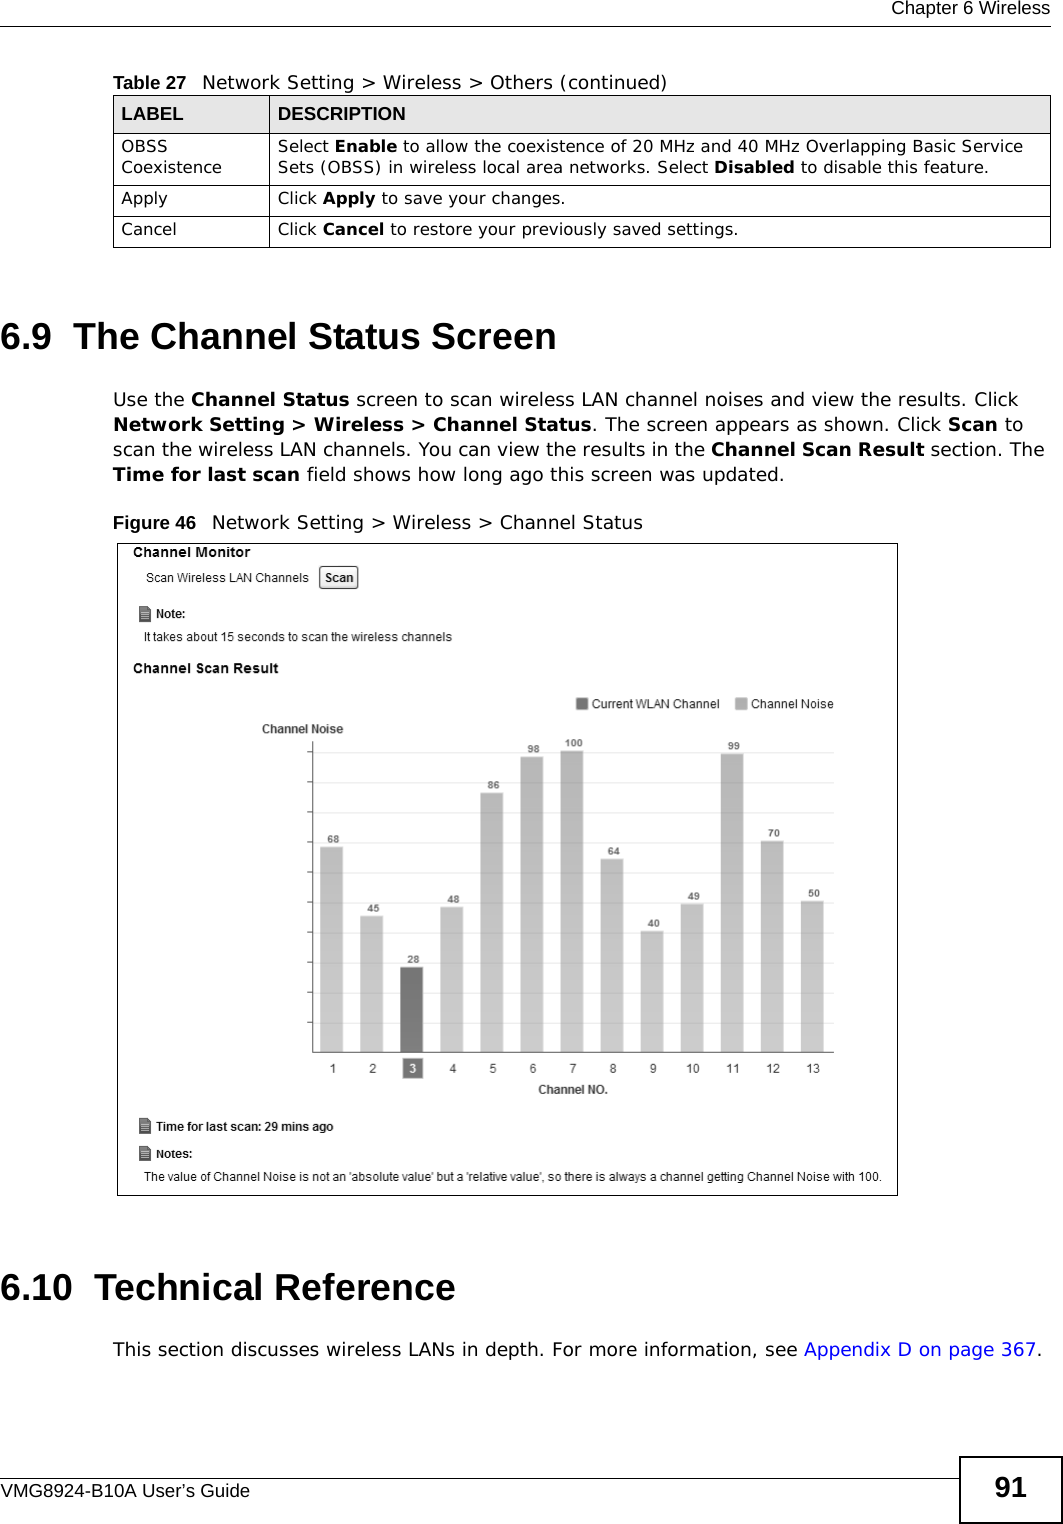  Chapter 6 WirelessVMG8924-B10A User’s Guide 916.9  The Channel Status ScreenUse the Channel Status screen to scan wireless LAN channel noises and view the results. Click Network Setting &gt; Wireless &gt; Channel Status. The screen appears as shown. Click Scan to scan the wireless LAN channels. You can view the results in the Channel Scan Result section. The Time for last scan field shows how long ago this screen was updated.Figure 46   Network Setting &gt; Wireless &gt; Channel Status6.10  Technical ReferenceThis section discusses wireless LANs in depth. For more information, see Appendix D on page 367.OBSS Coexistence Select Enable to allow the coexistence of 20 MHz and 40 MHz Overlapping Basic Service Sets (OBSS) in wireless local area networks. Select Disabled to disable this feature.Apply Click Apply to save your changes.Cancel Click Cancel to restore your previously saved settings.Table 27   Network Setting &gt; Wireless &gt; Others (continued)LABEL DESCRIPTION